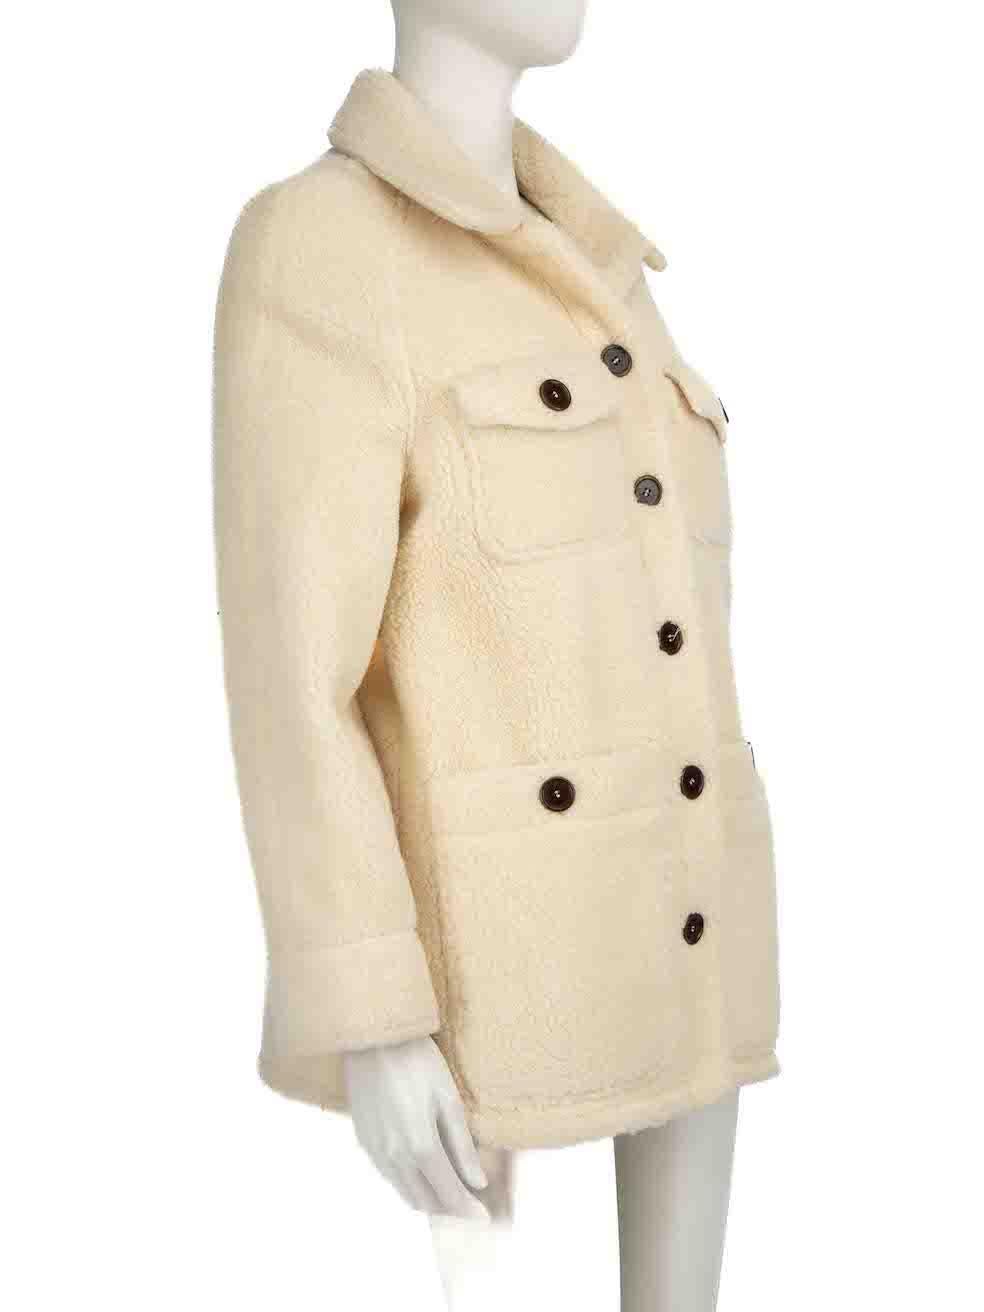 CONDITION is Very good. Minimal wear to jacket is evident. Minimal wear to the attachment of the centre front buttons where some of the stitching has come unthreaded on this used Sèzane designer resale item.
 
 
 
 Details
 
 
 Ecru
 
 Wool
 
 Borg